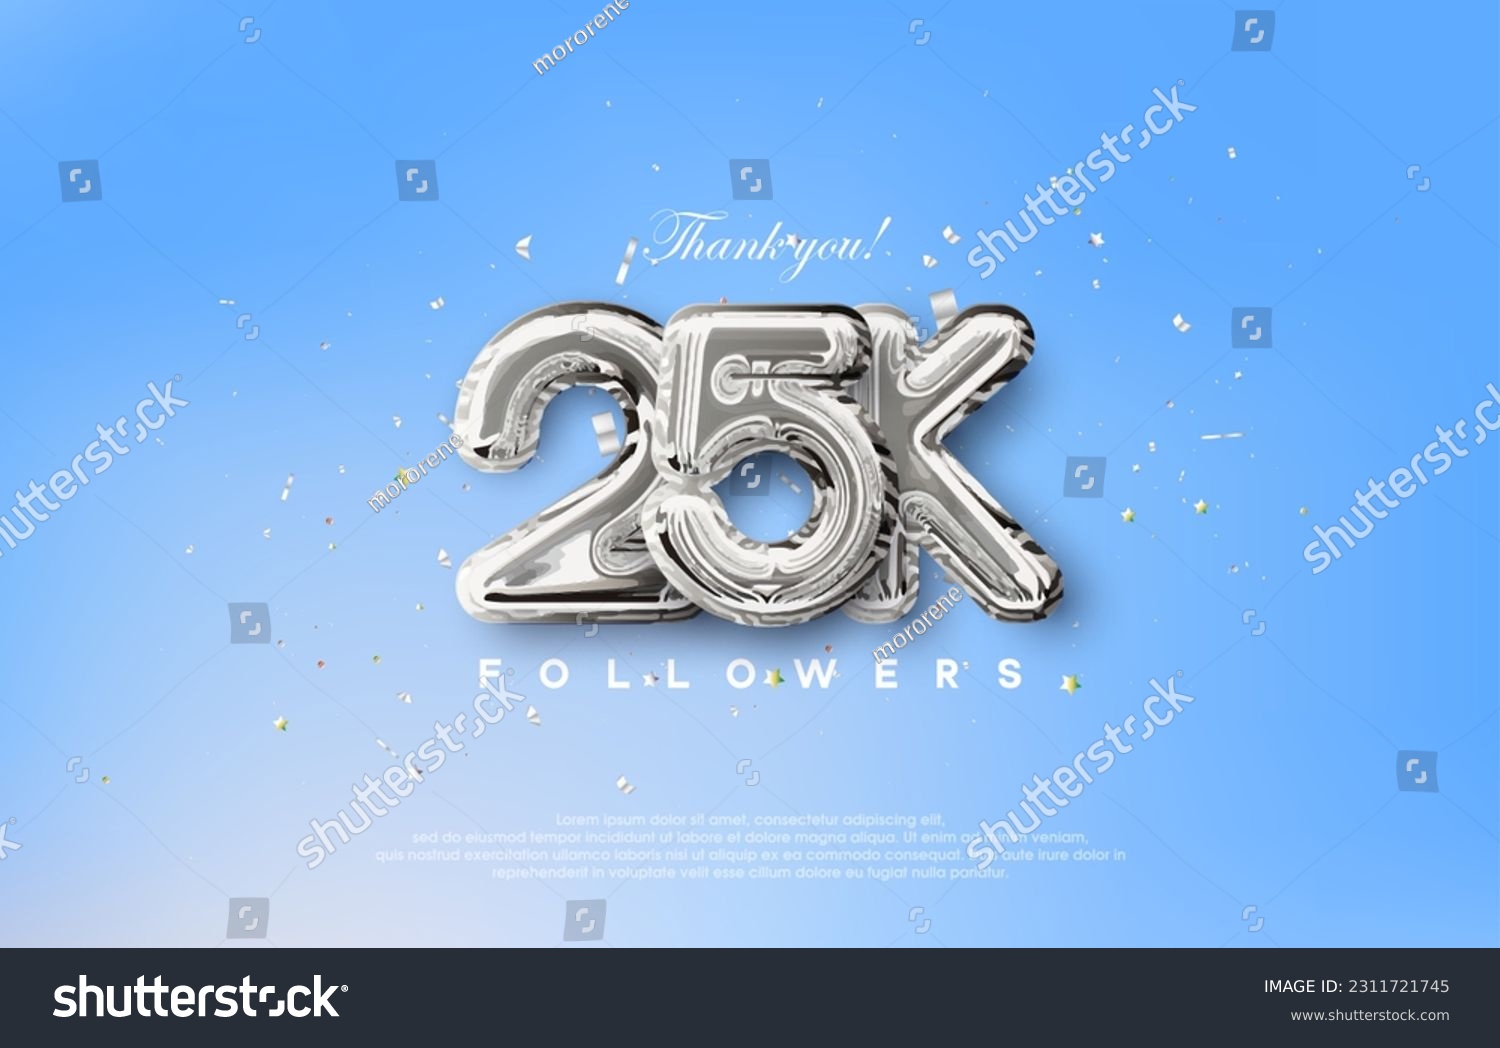 SVG of Thank you for the 25k followers with silver metallic balloons illustration. svg